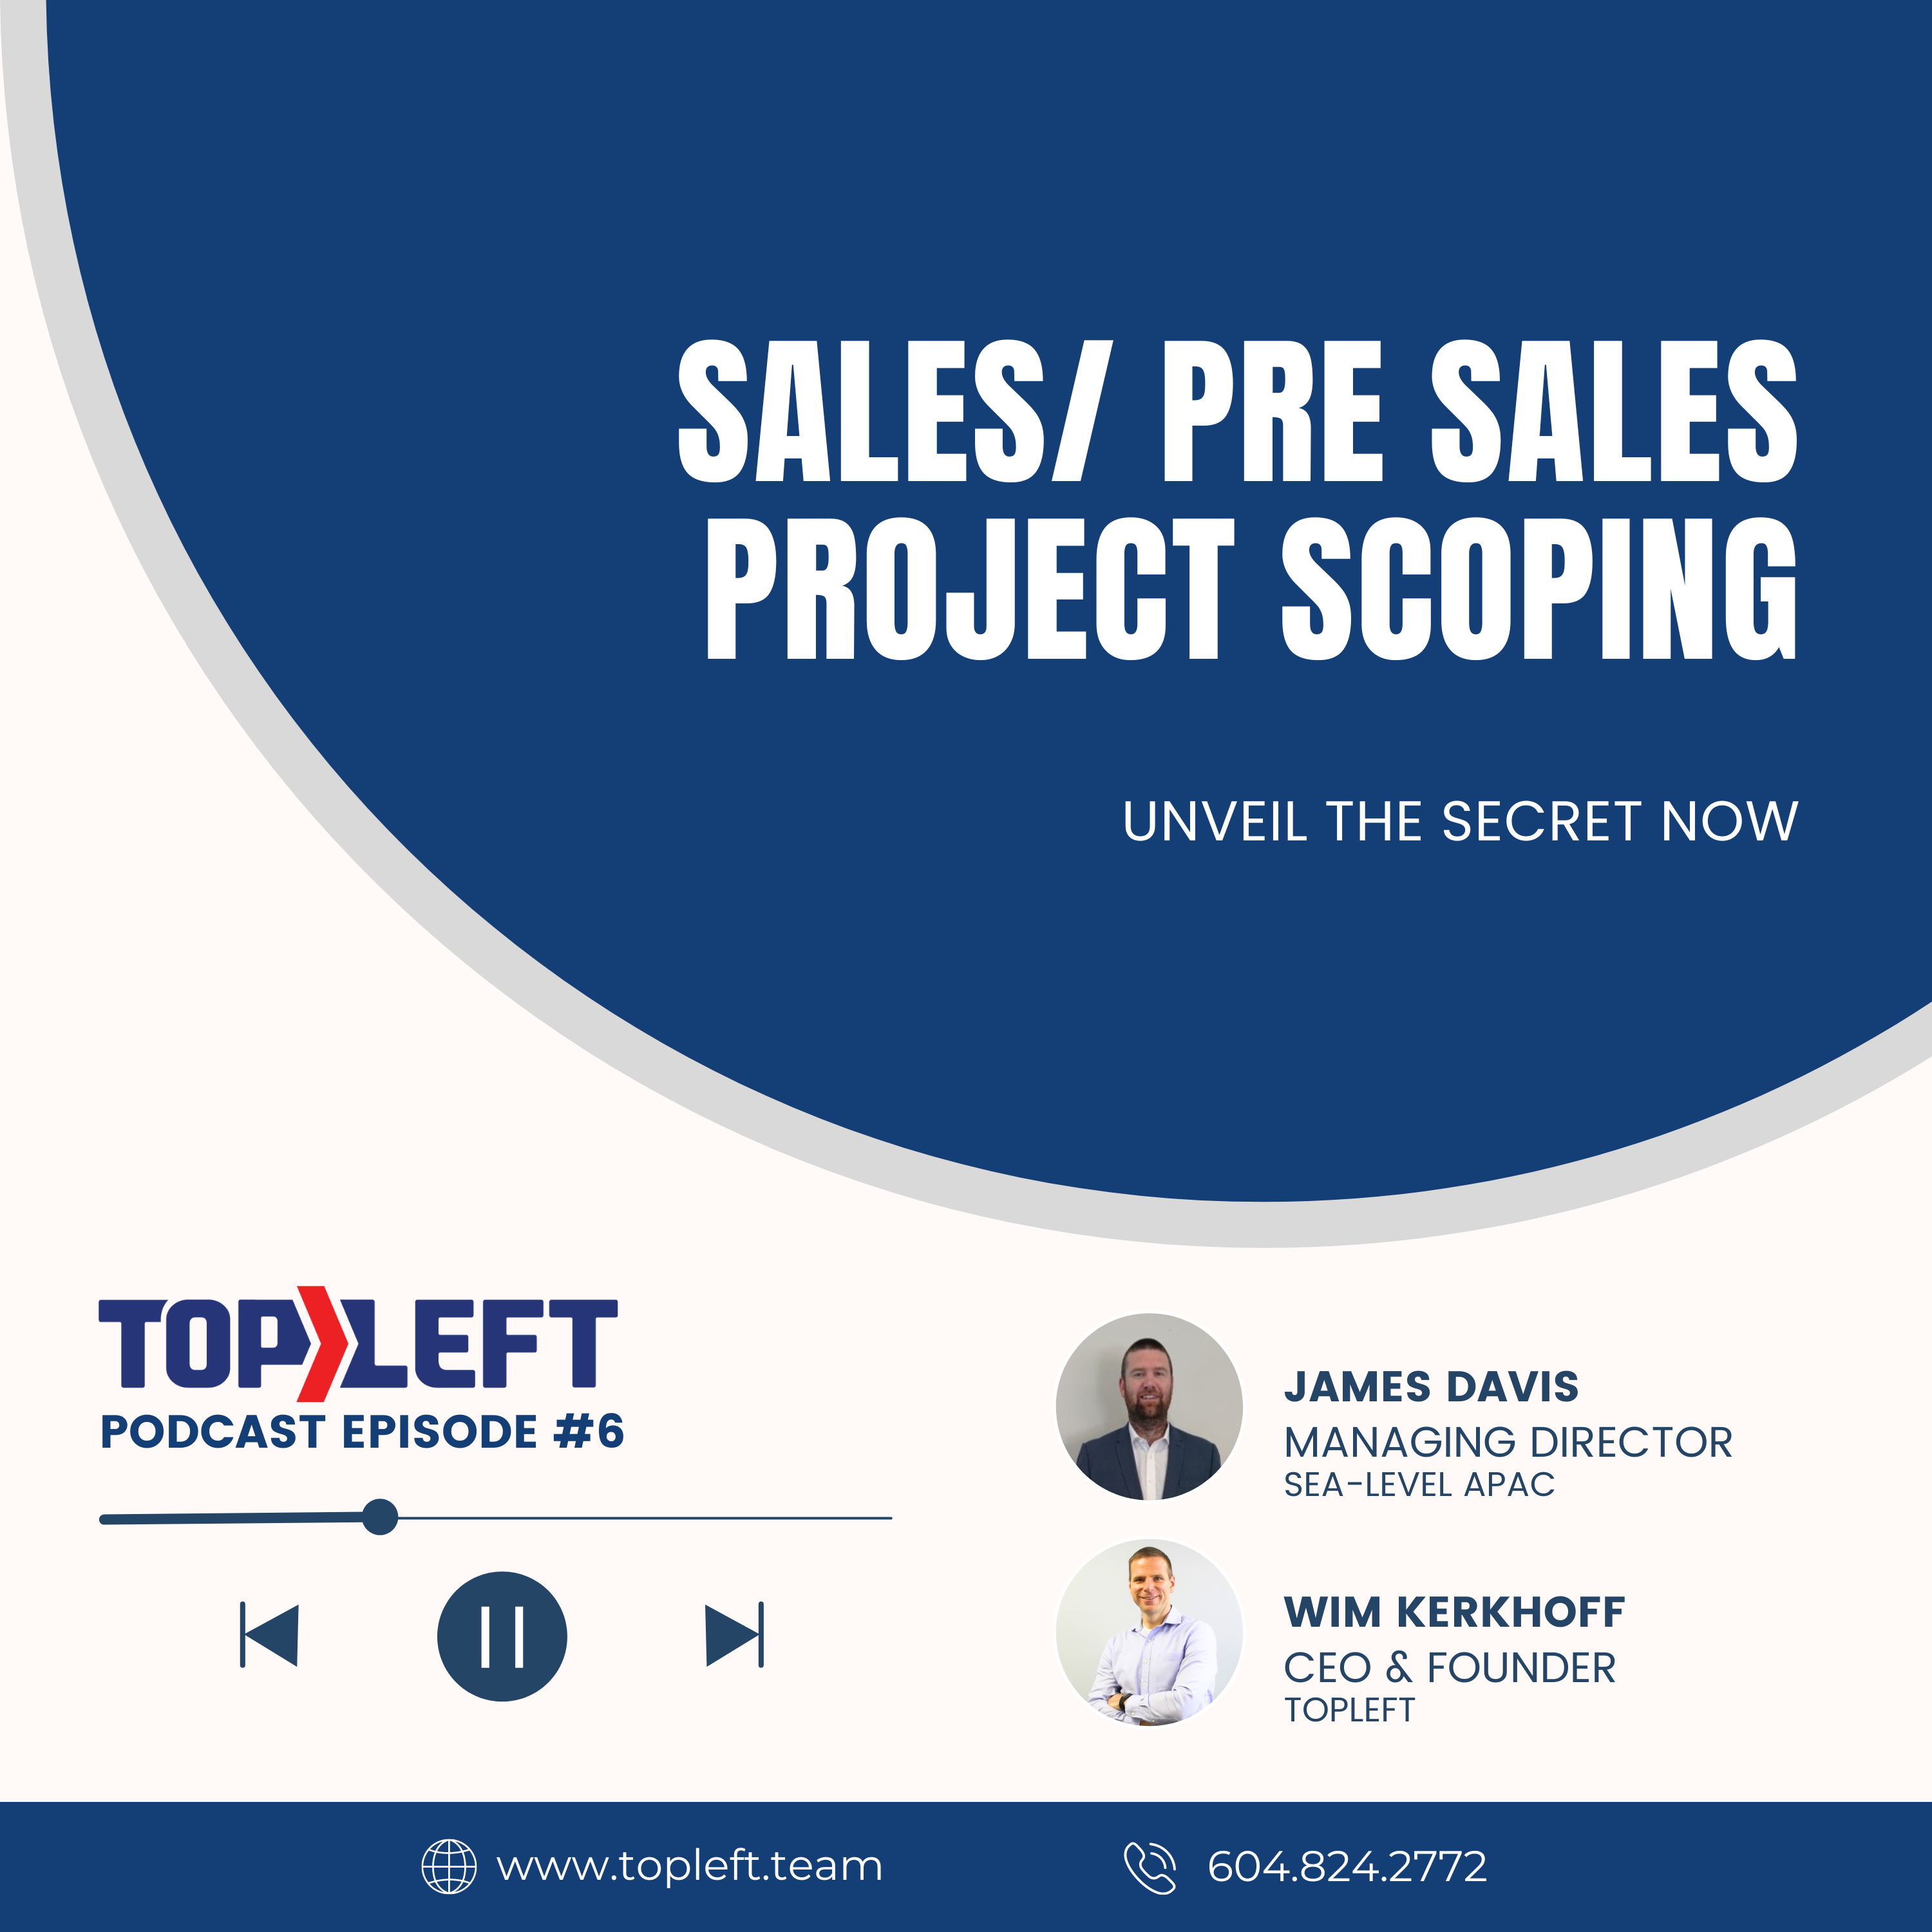 Podcast Ep 6 | Sales/ Presales Project Scoping